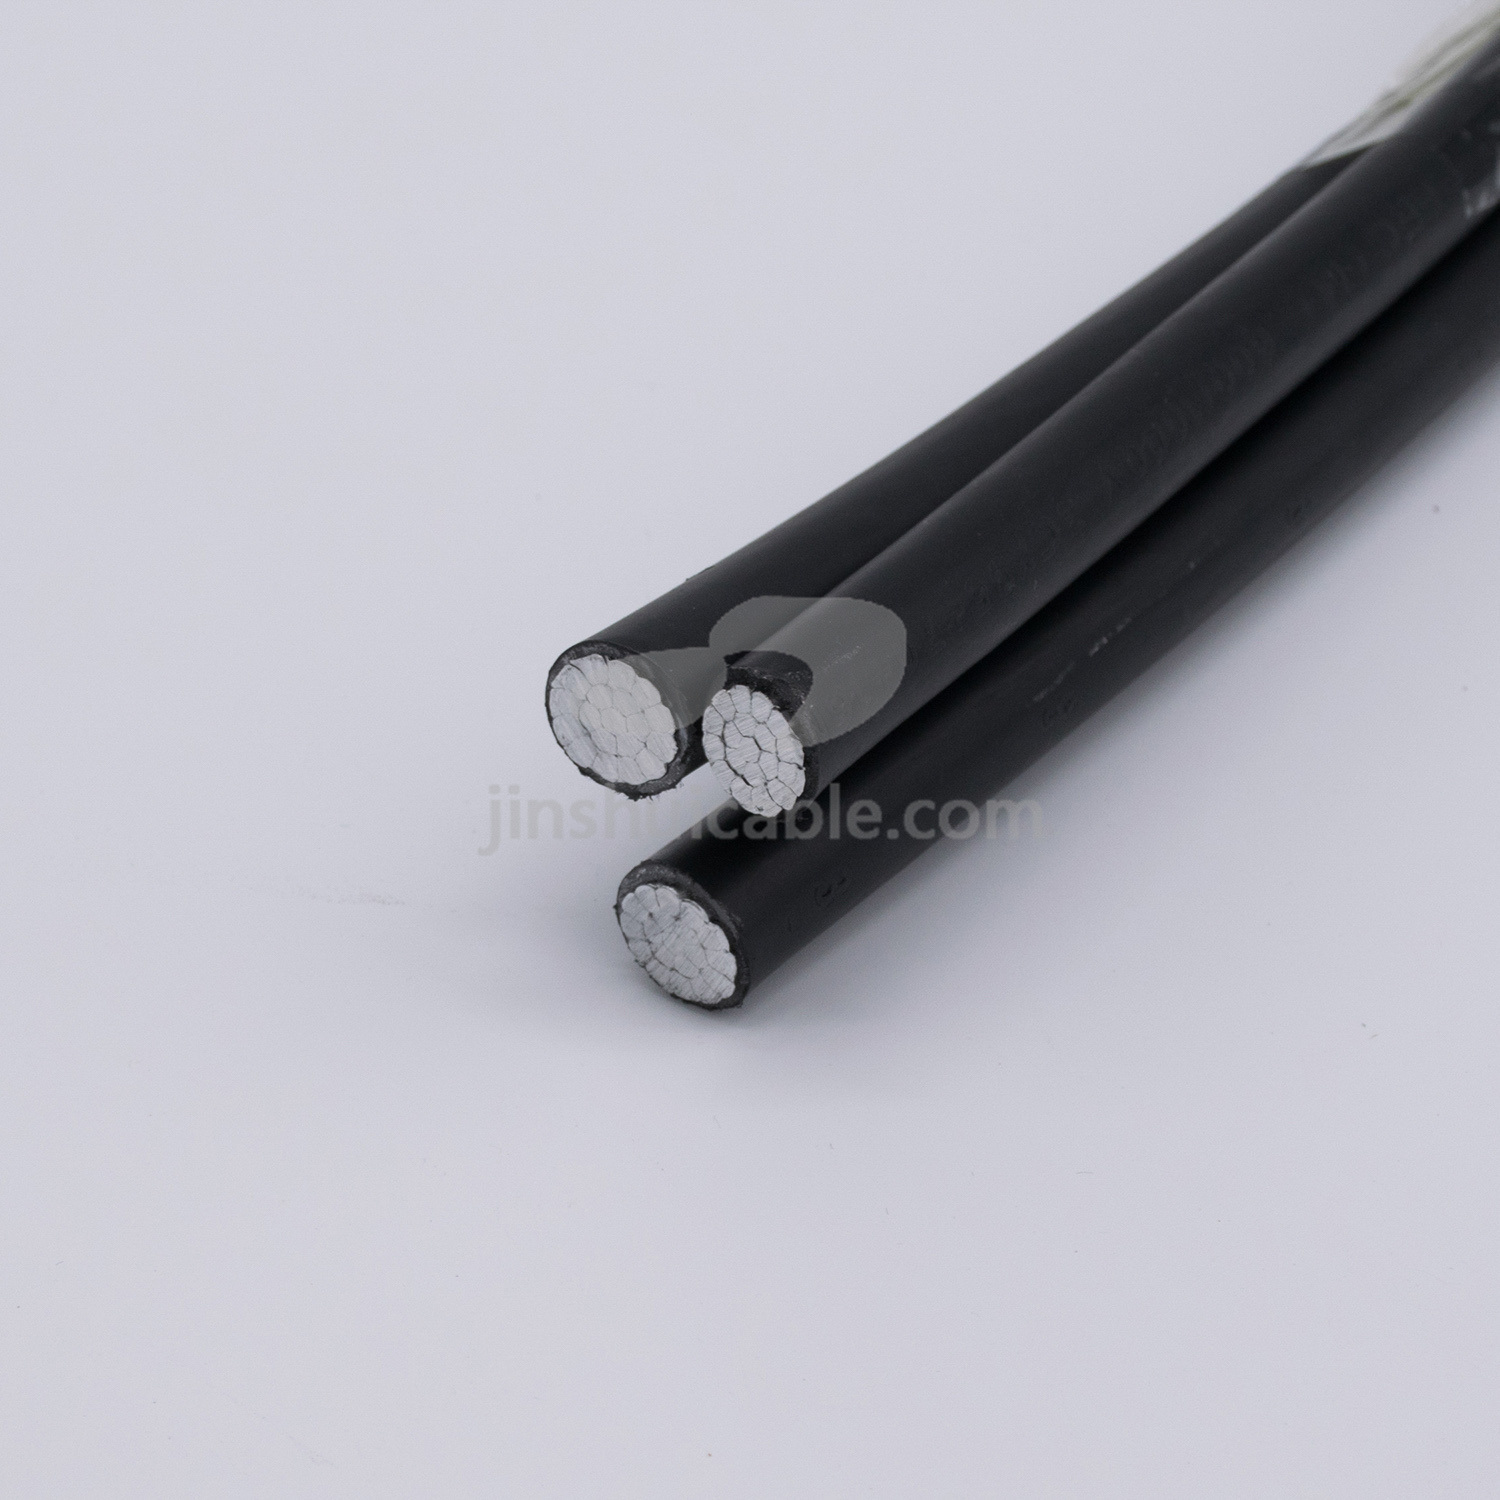 Compacted Conductor Serivice Drop LV. Aluminum Cable